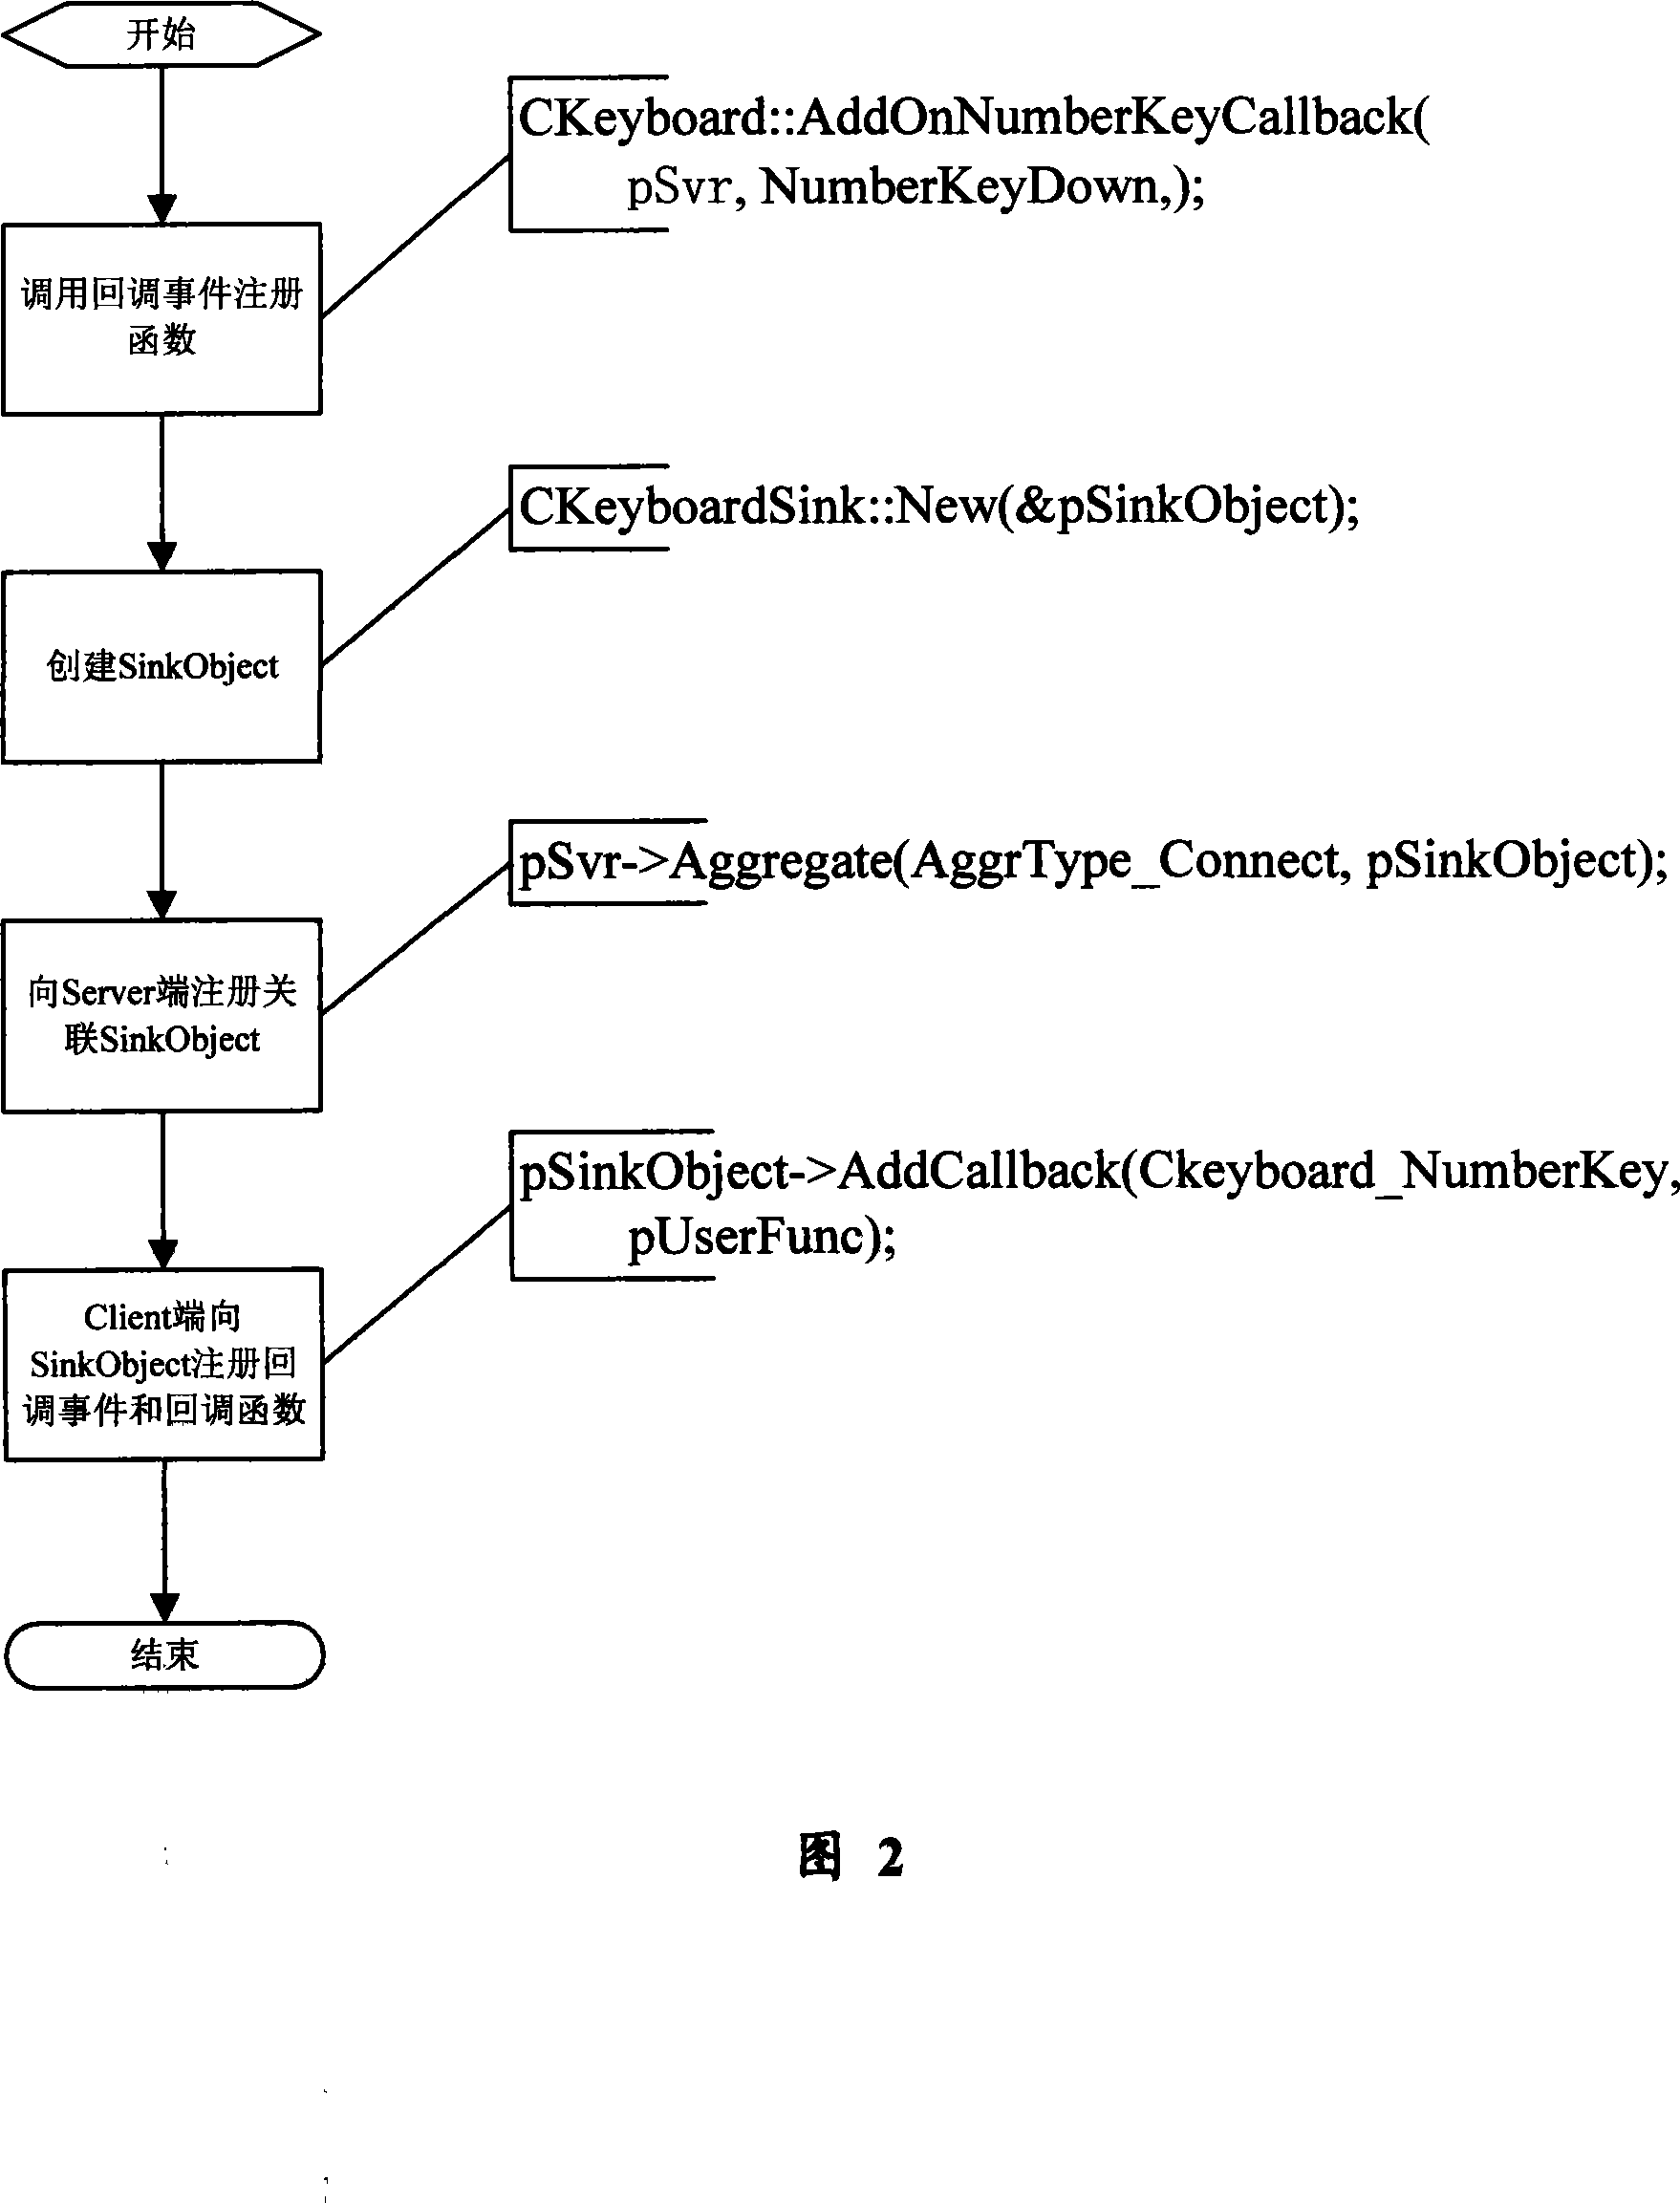 Method for implementing event call-back based on component interface in computer software system